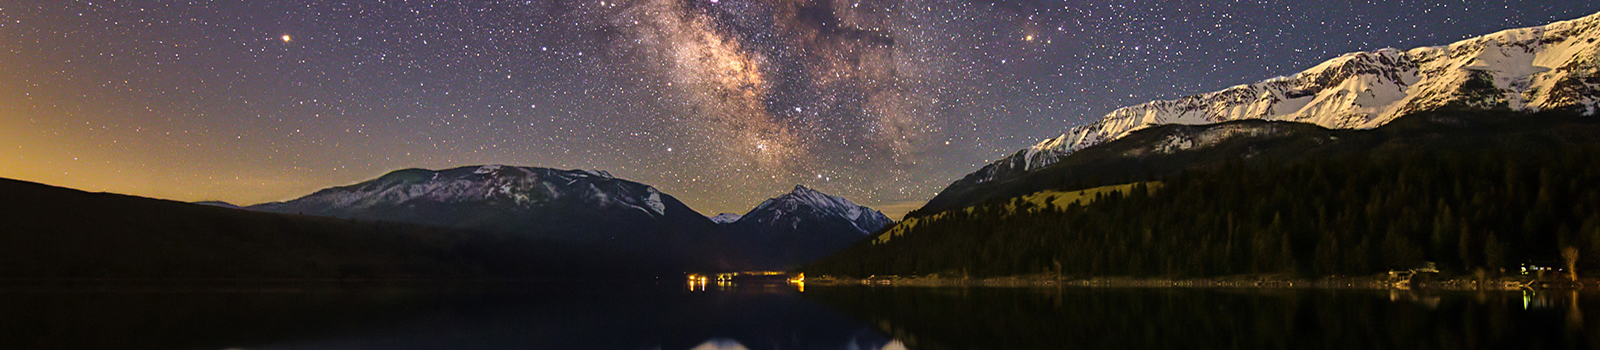 Wallowa Lake at night with astrological sky effect